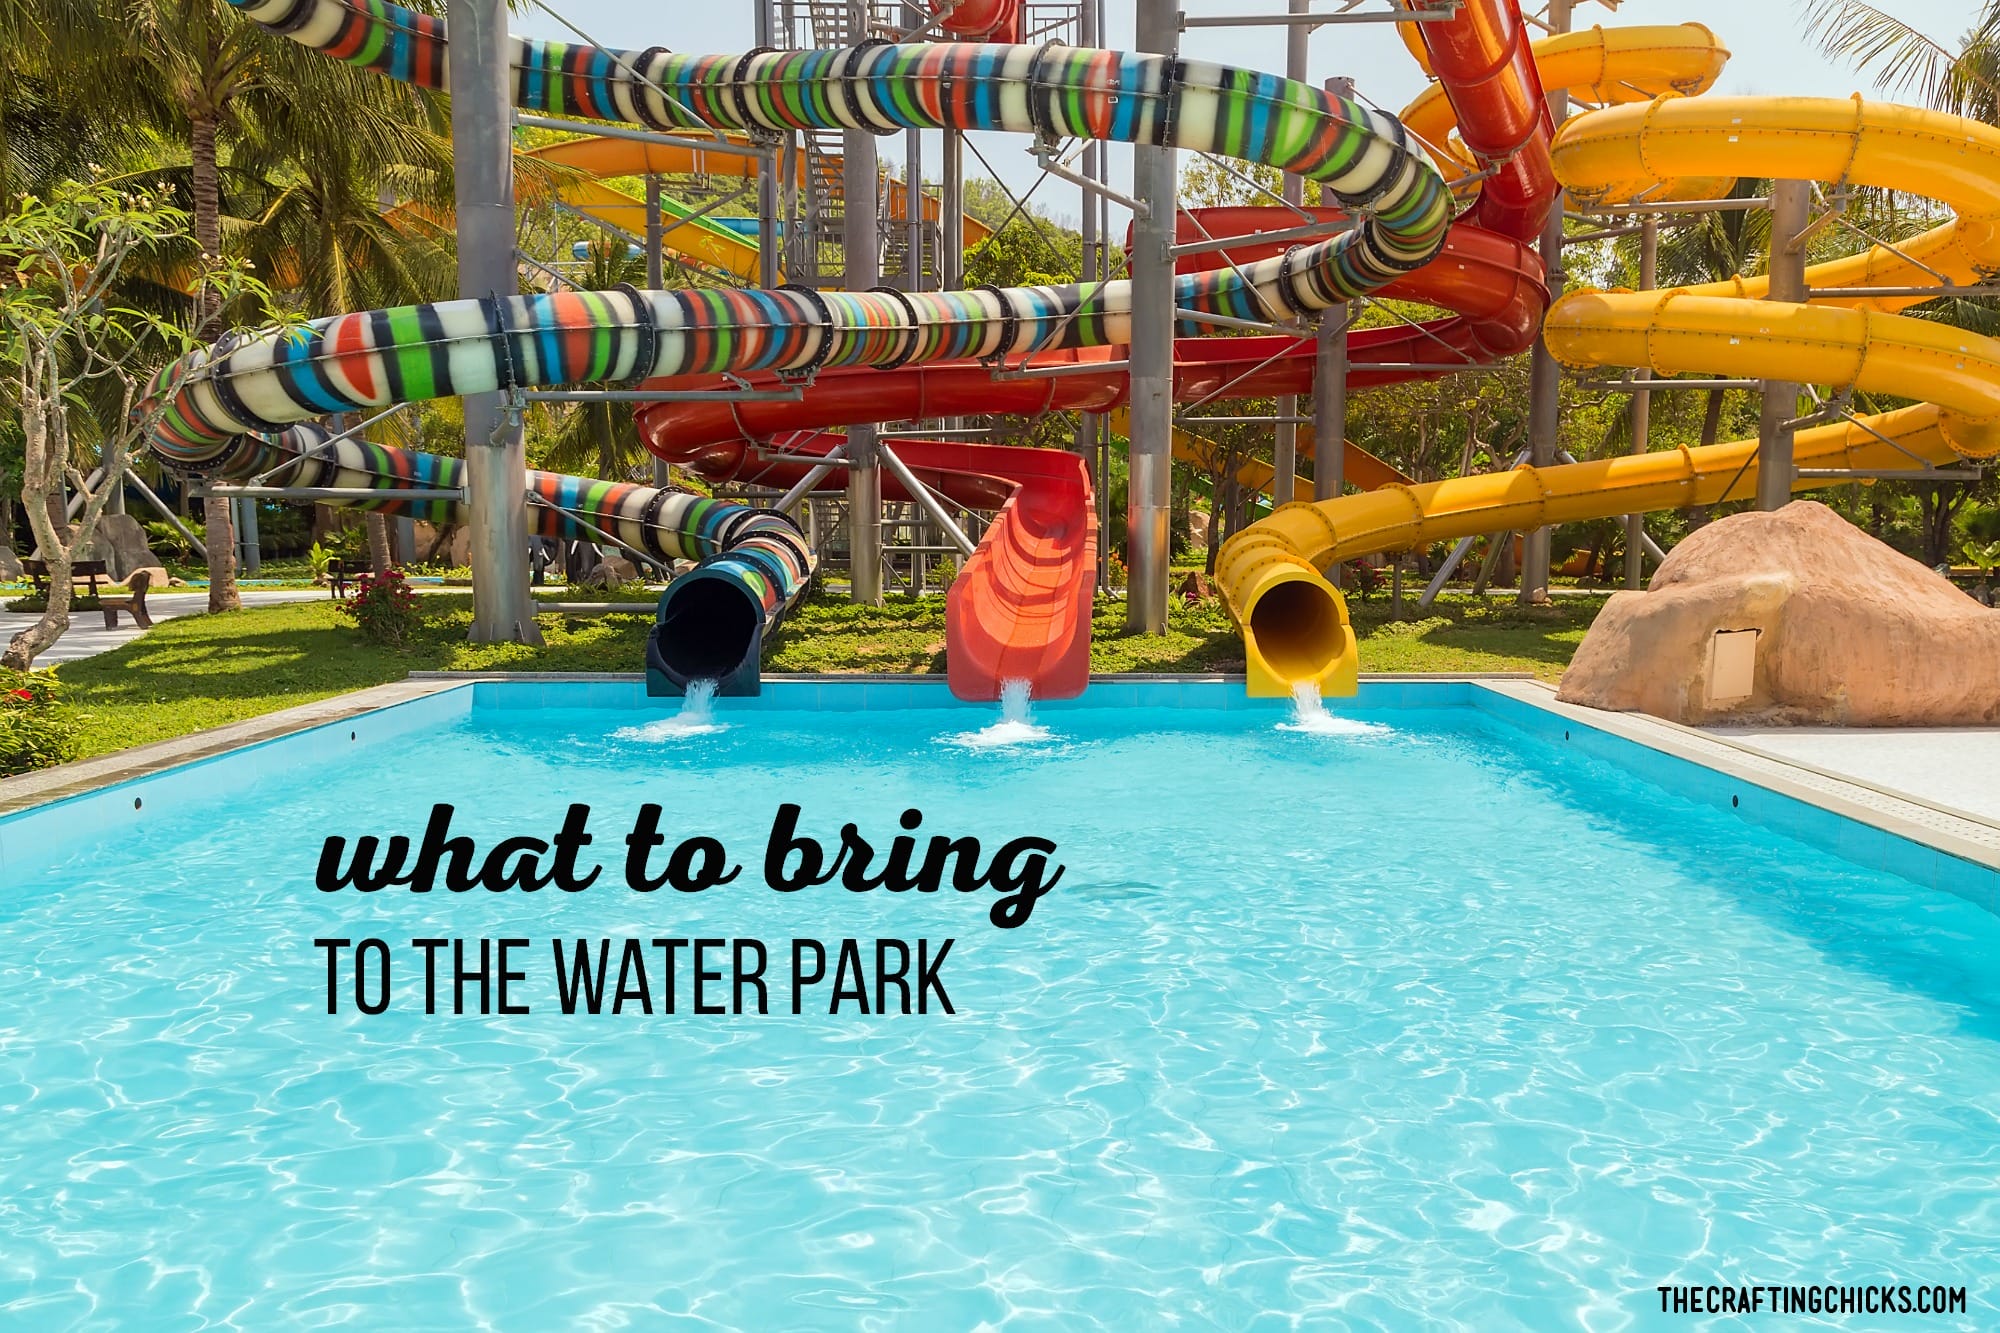 Make sure you have everything you'll need for a Water Park outing with our list of What to bring. #whattobringtothewaterpark #waterparkmusthaves #waterparkvacations